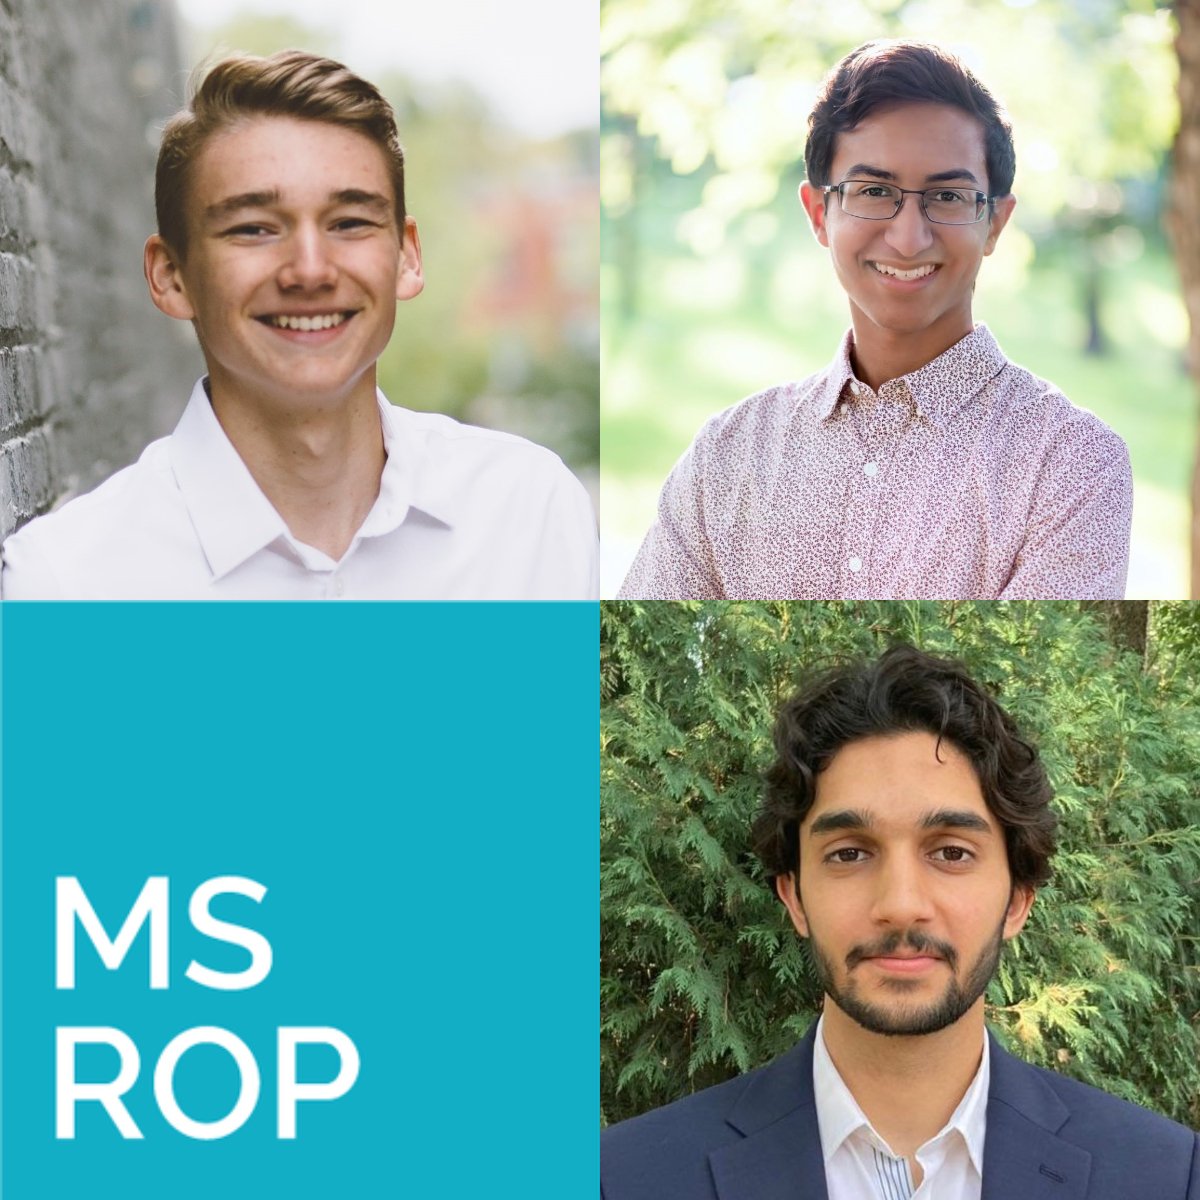 Photos of three MSROP Scholars, with text that says "MSROP"